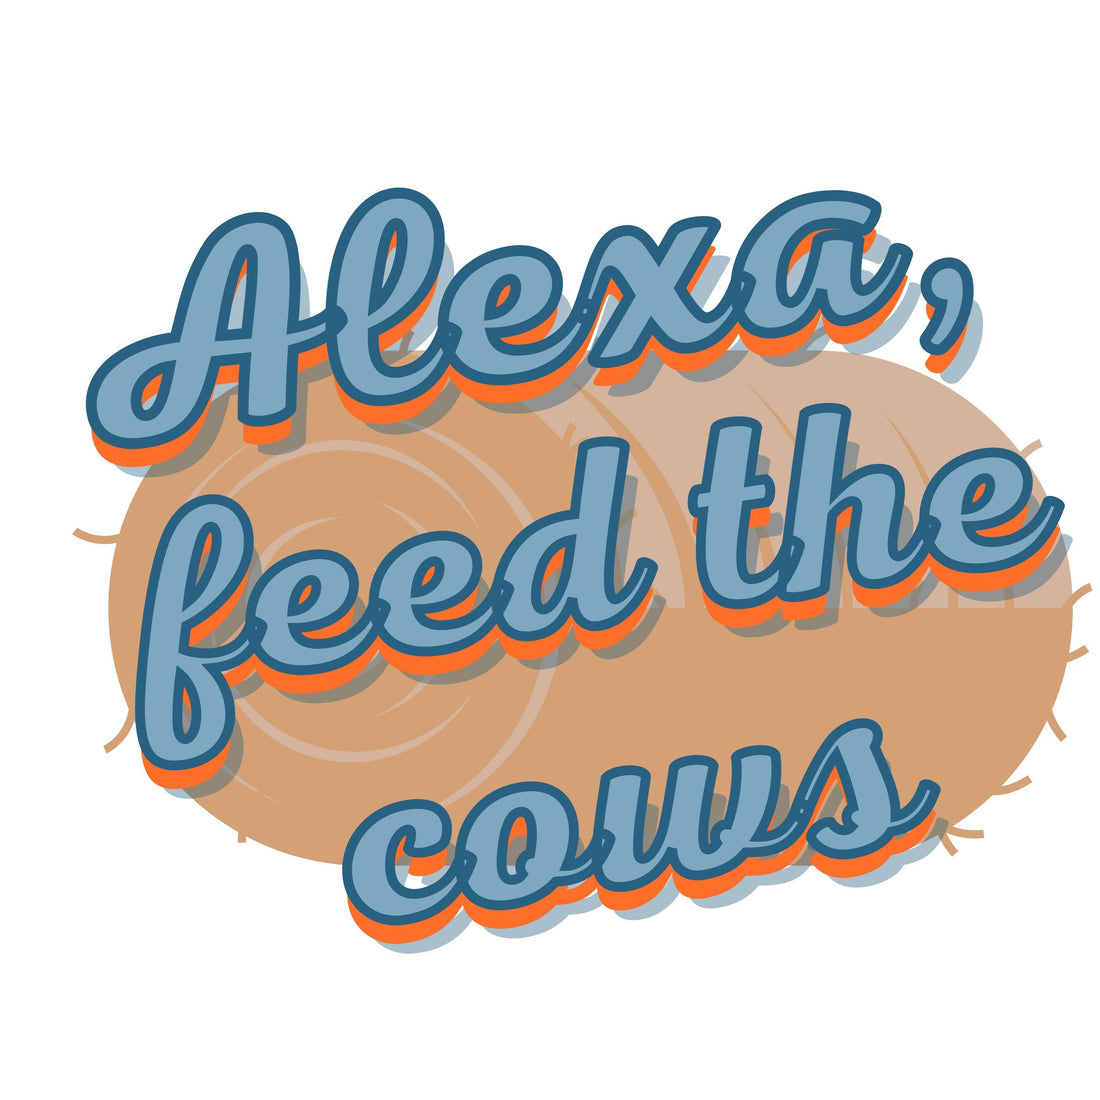 Copy of Alexa Feed The Cows Sticker